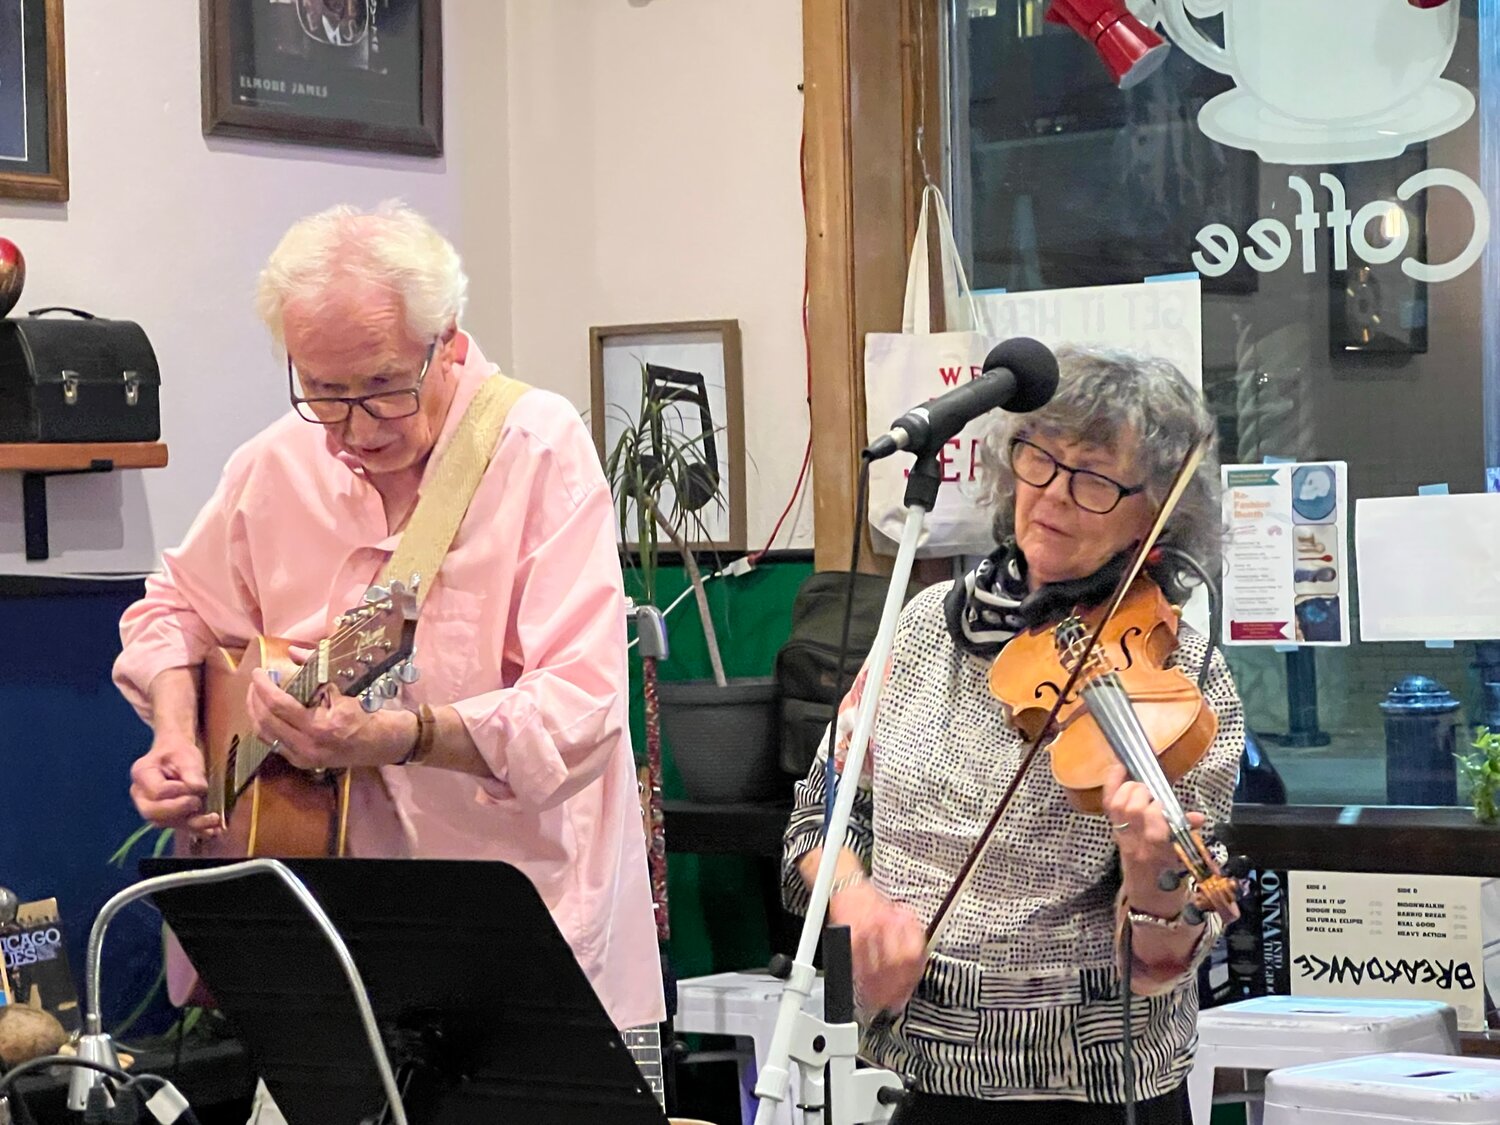 Cleve and Mary play recently at Downtown Blues Coffee, where on Sept. 8 Cleve will read from and sign copies of his book, "Life is a Butt Dial: Tales from a Life Among the Tragically Hip."